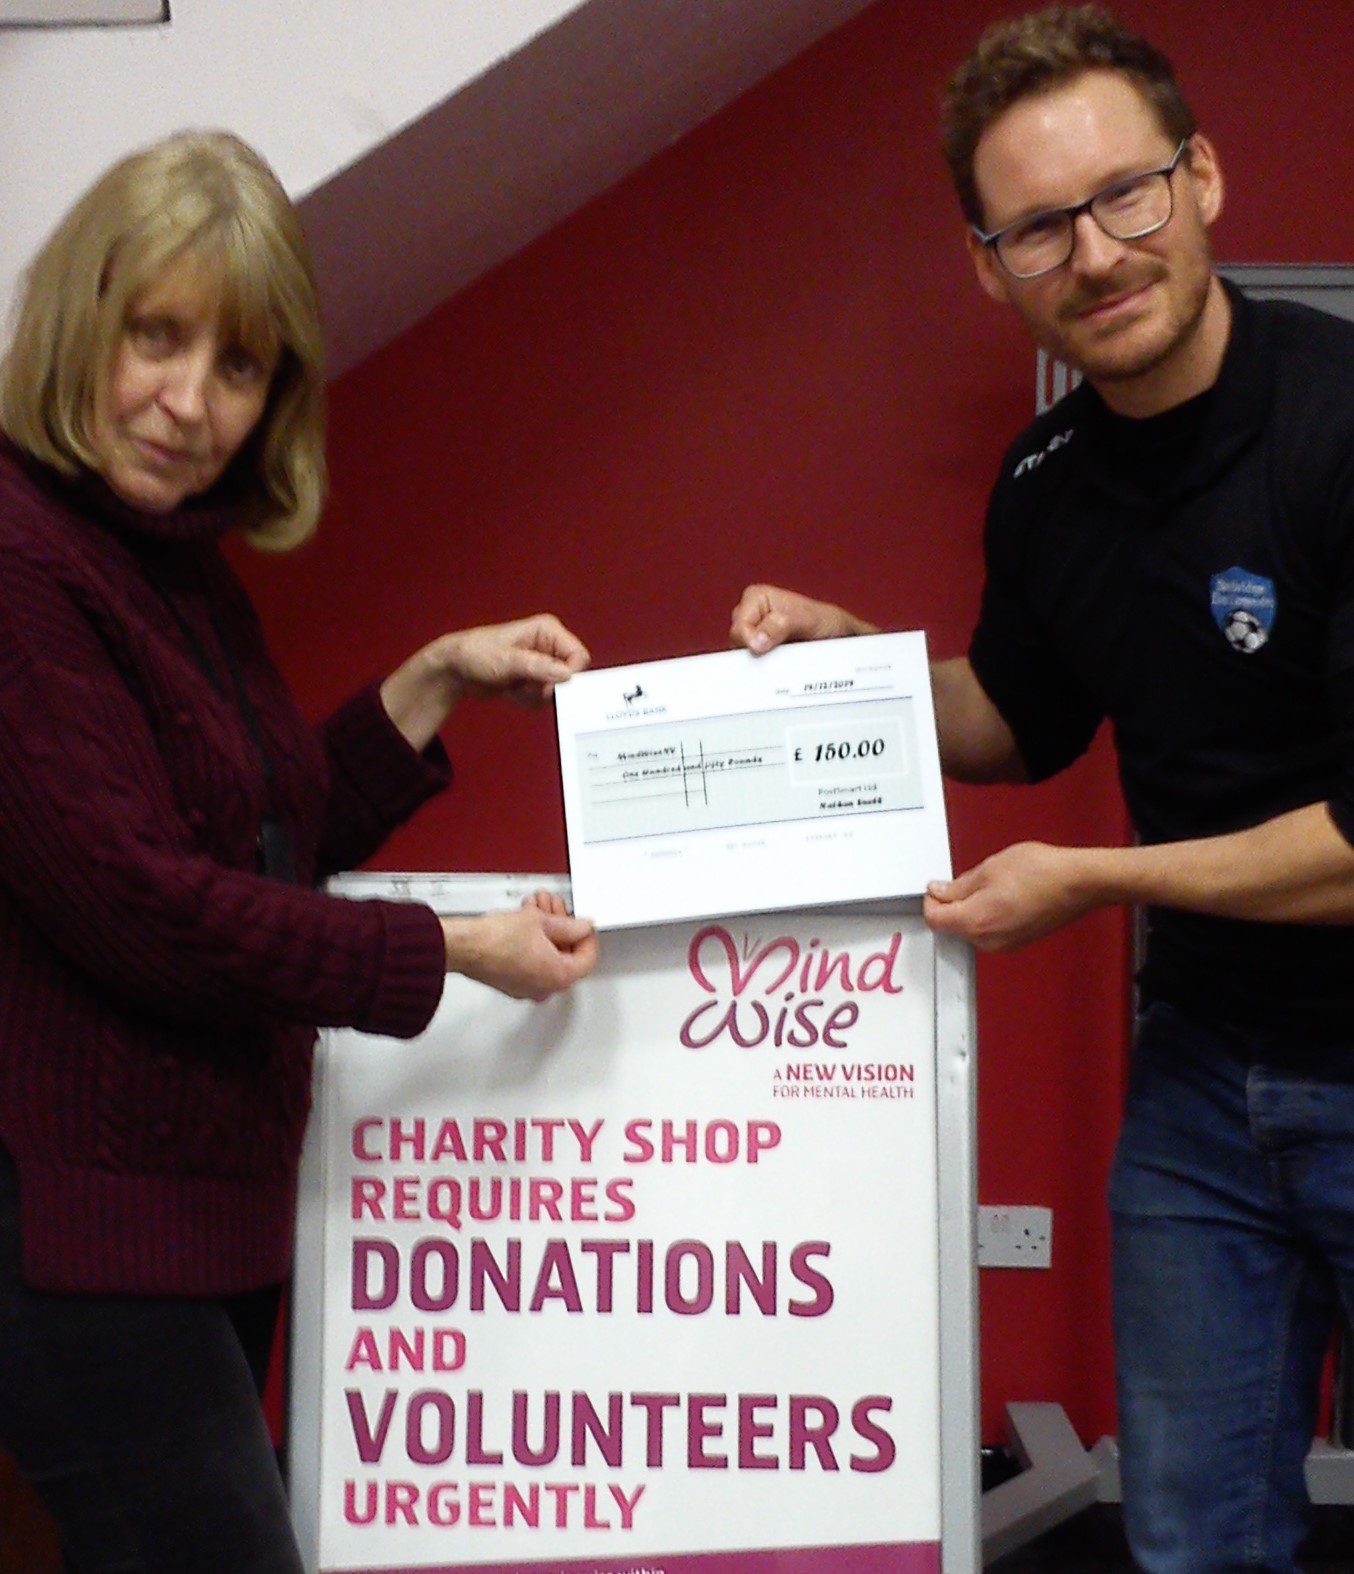 PostSmart proudly supporting our local charities